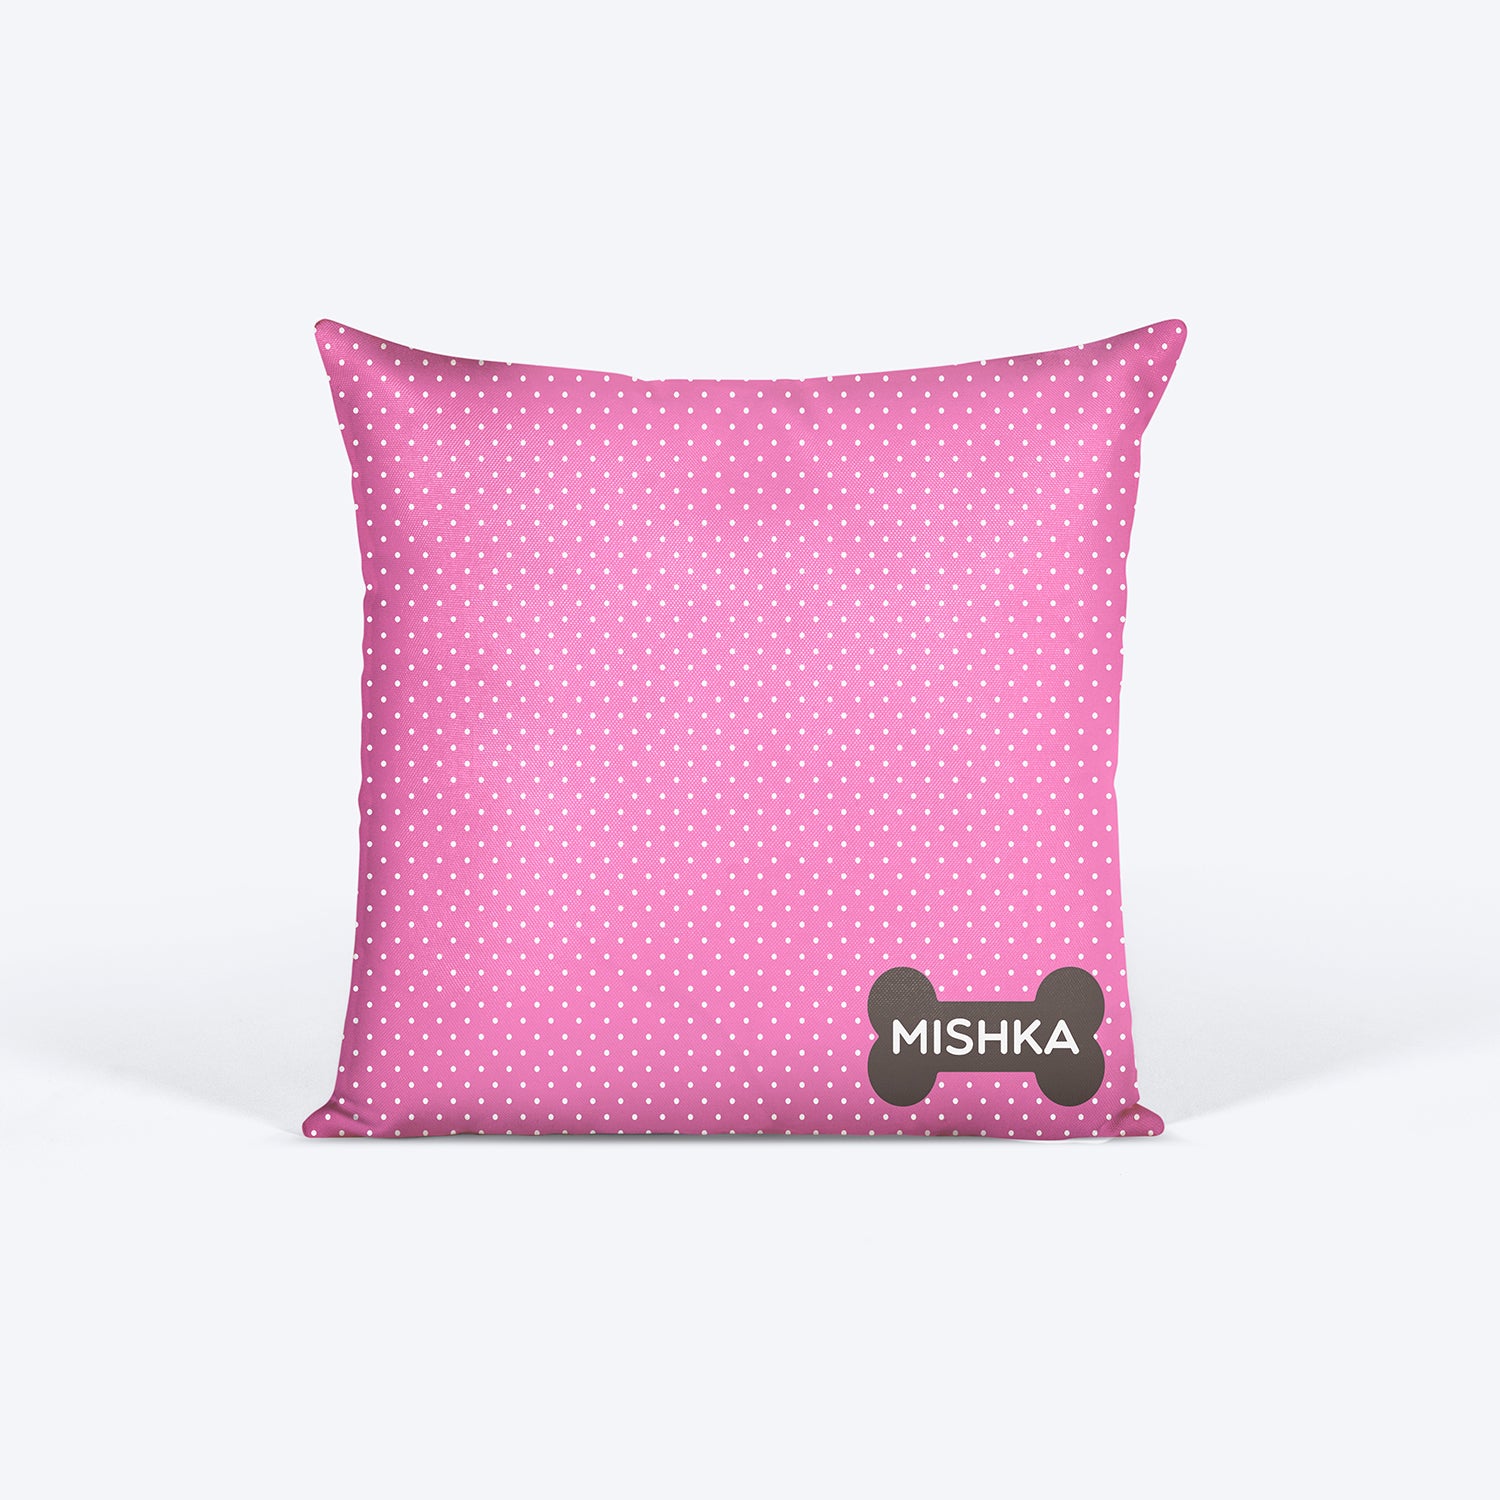 HUFT Pink Polka Dot Personalised Cushion - 12 inches (30 x 30 cm) - Heads Up For Tails